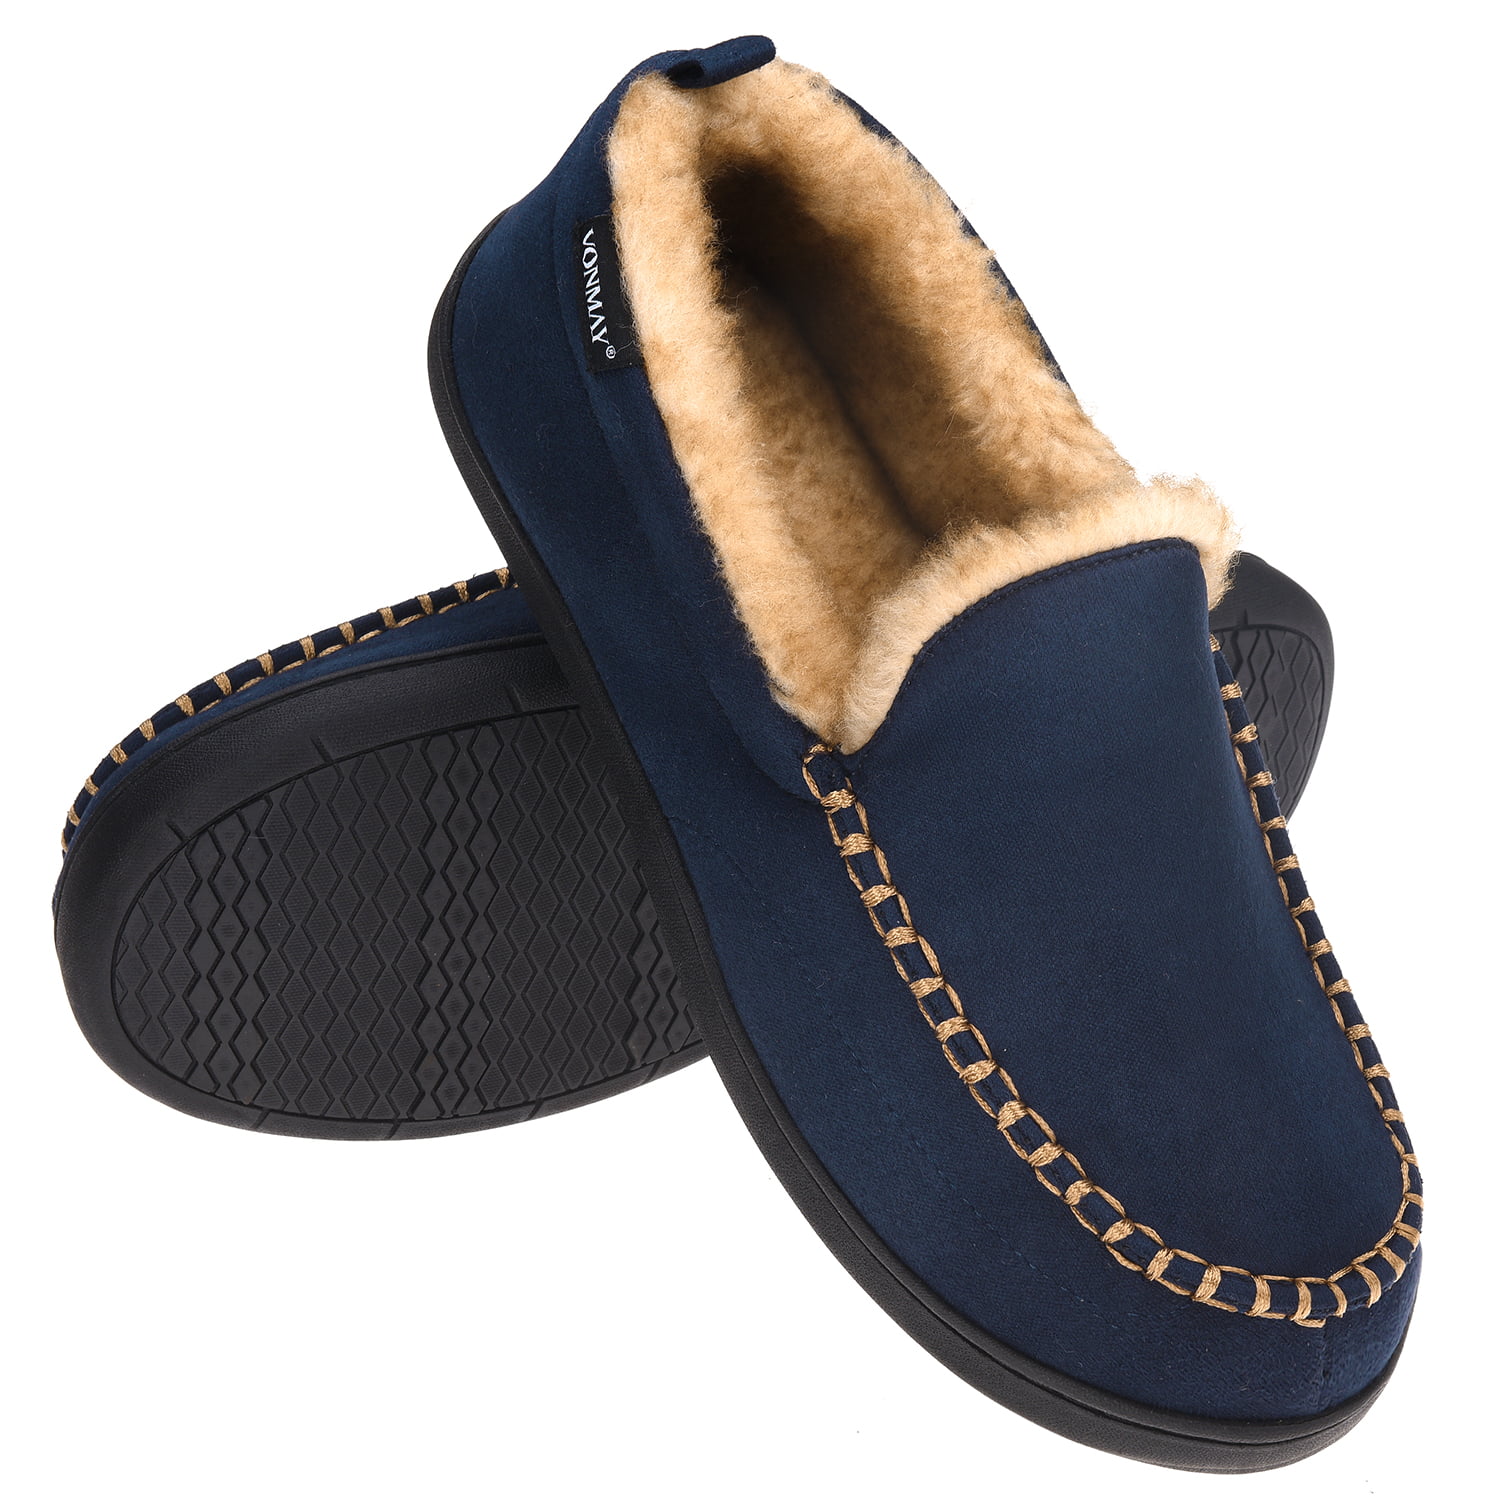 moccasin bedroom shoes